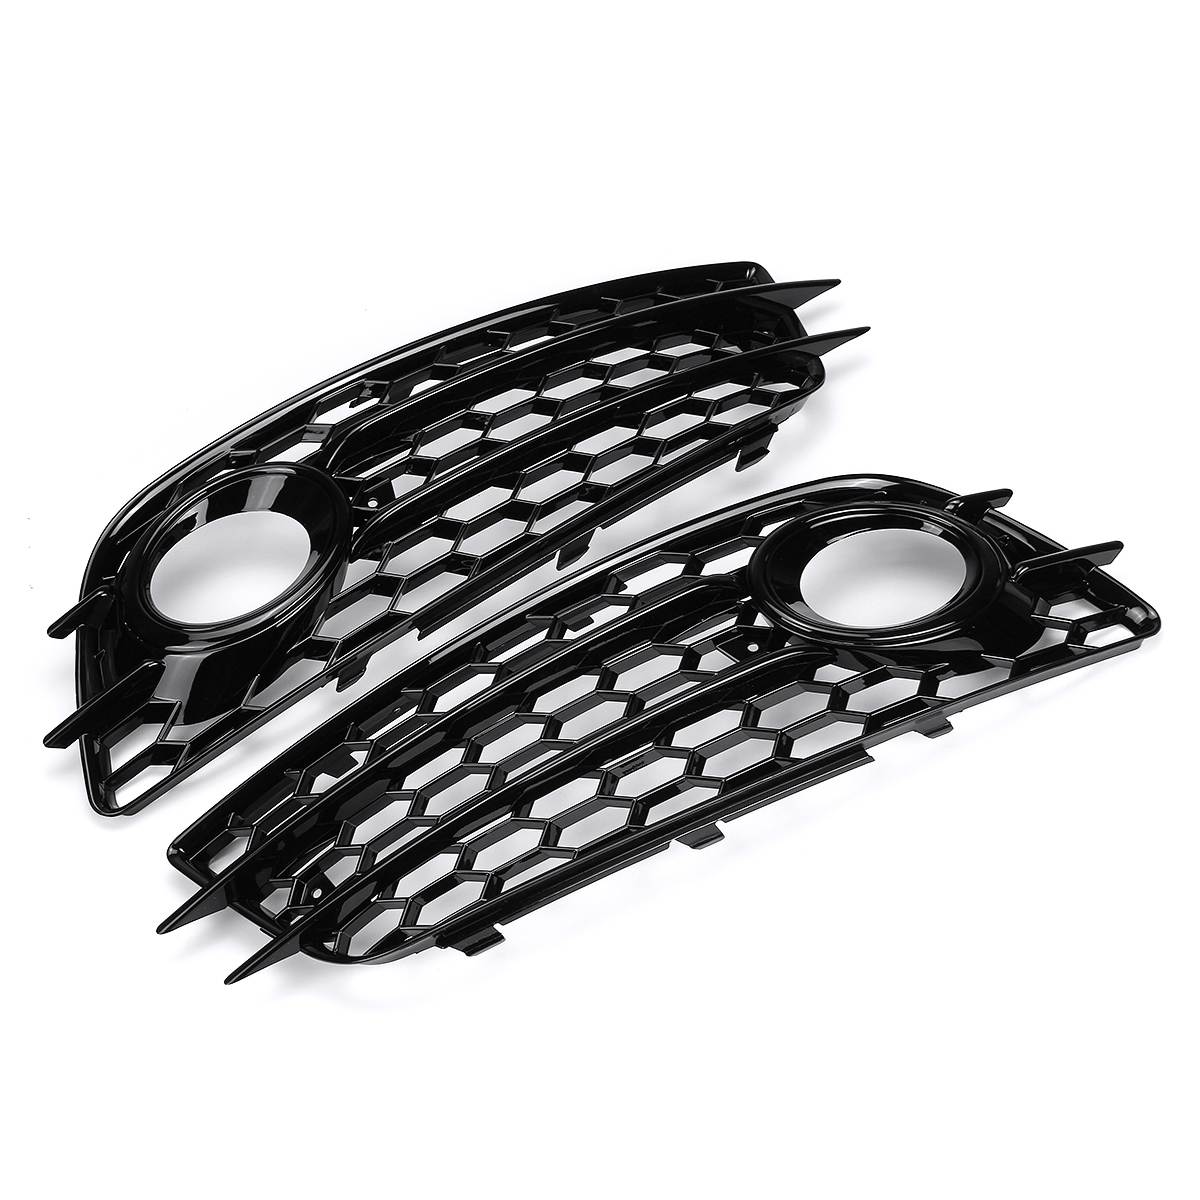 HONEYCOMB HEX Front Grille Grill For Audi A4 B8 S-Line S4 2008-2012 ...